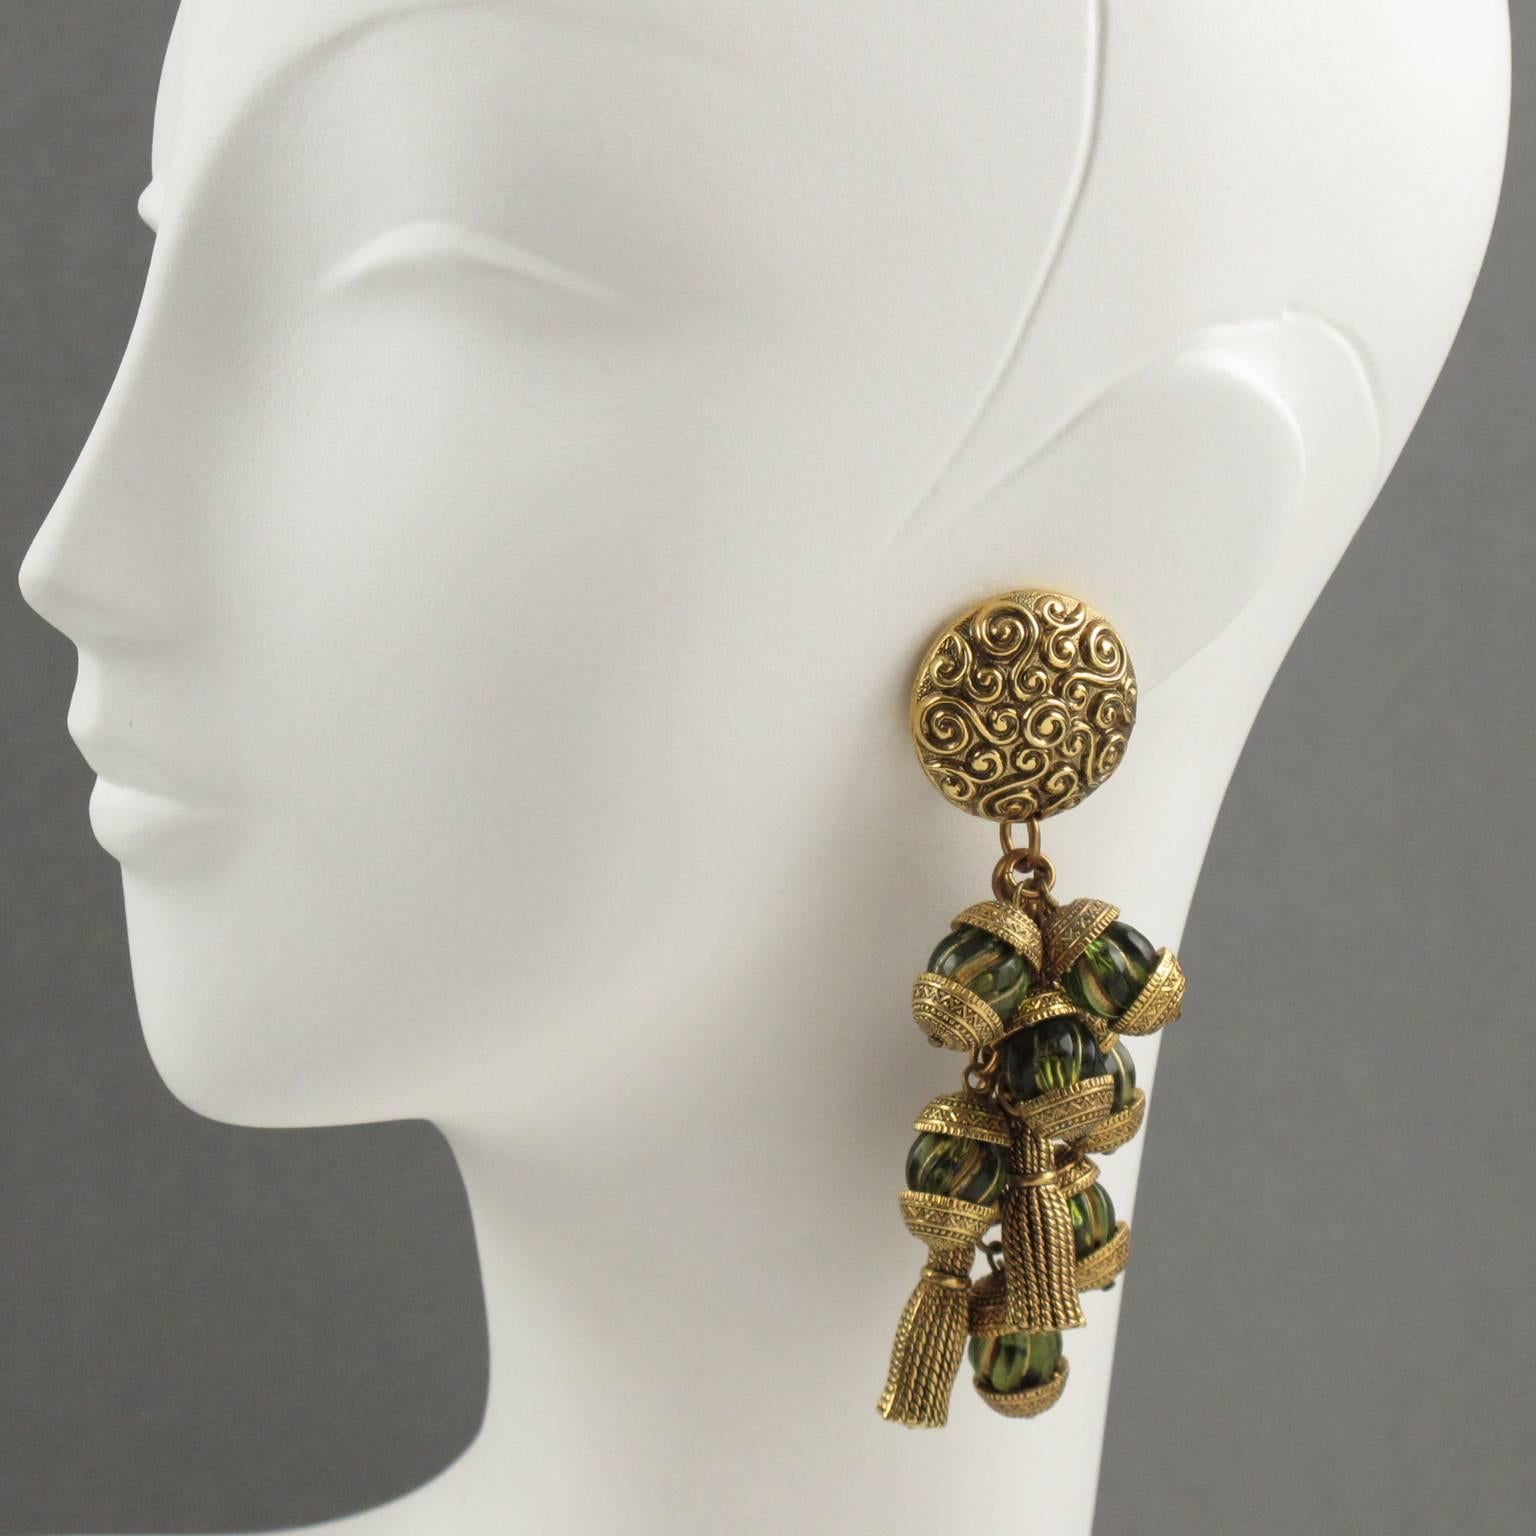 Stunning French Designer CHANTAL THOMASS Paris clip on earrings. Rare gorgeous dangling chandelier shape, featuring cluster of gilt resin carved tassels and transparent green resin beads with gilt accent. Unmarked. Excellent vintage condition.